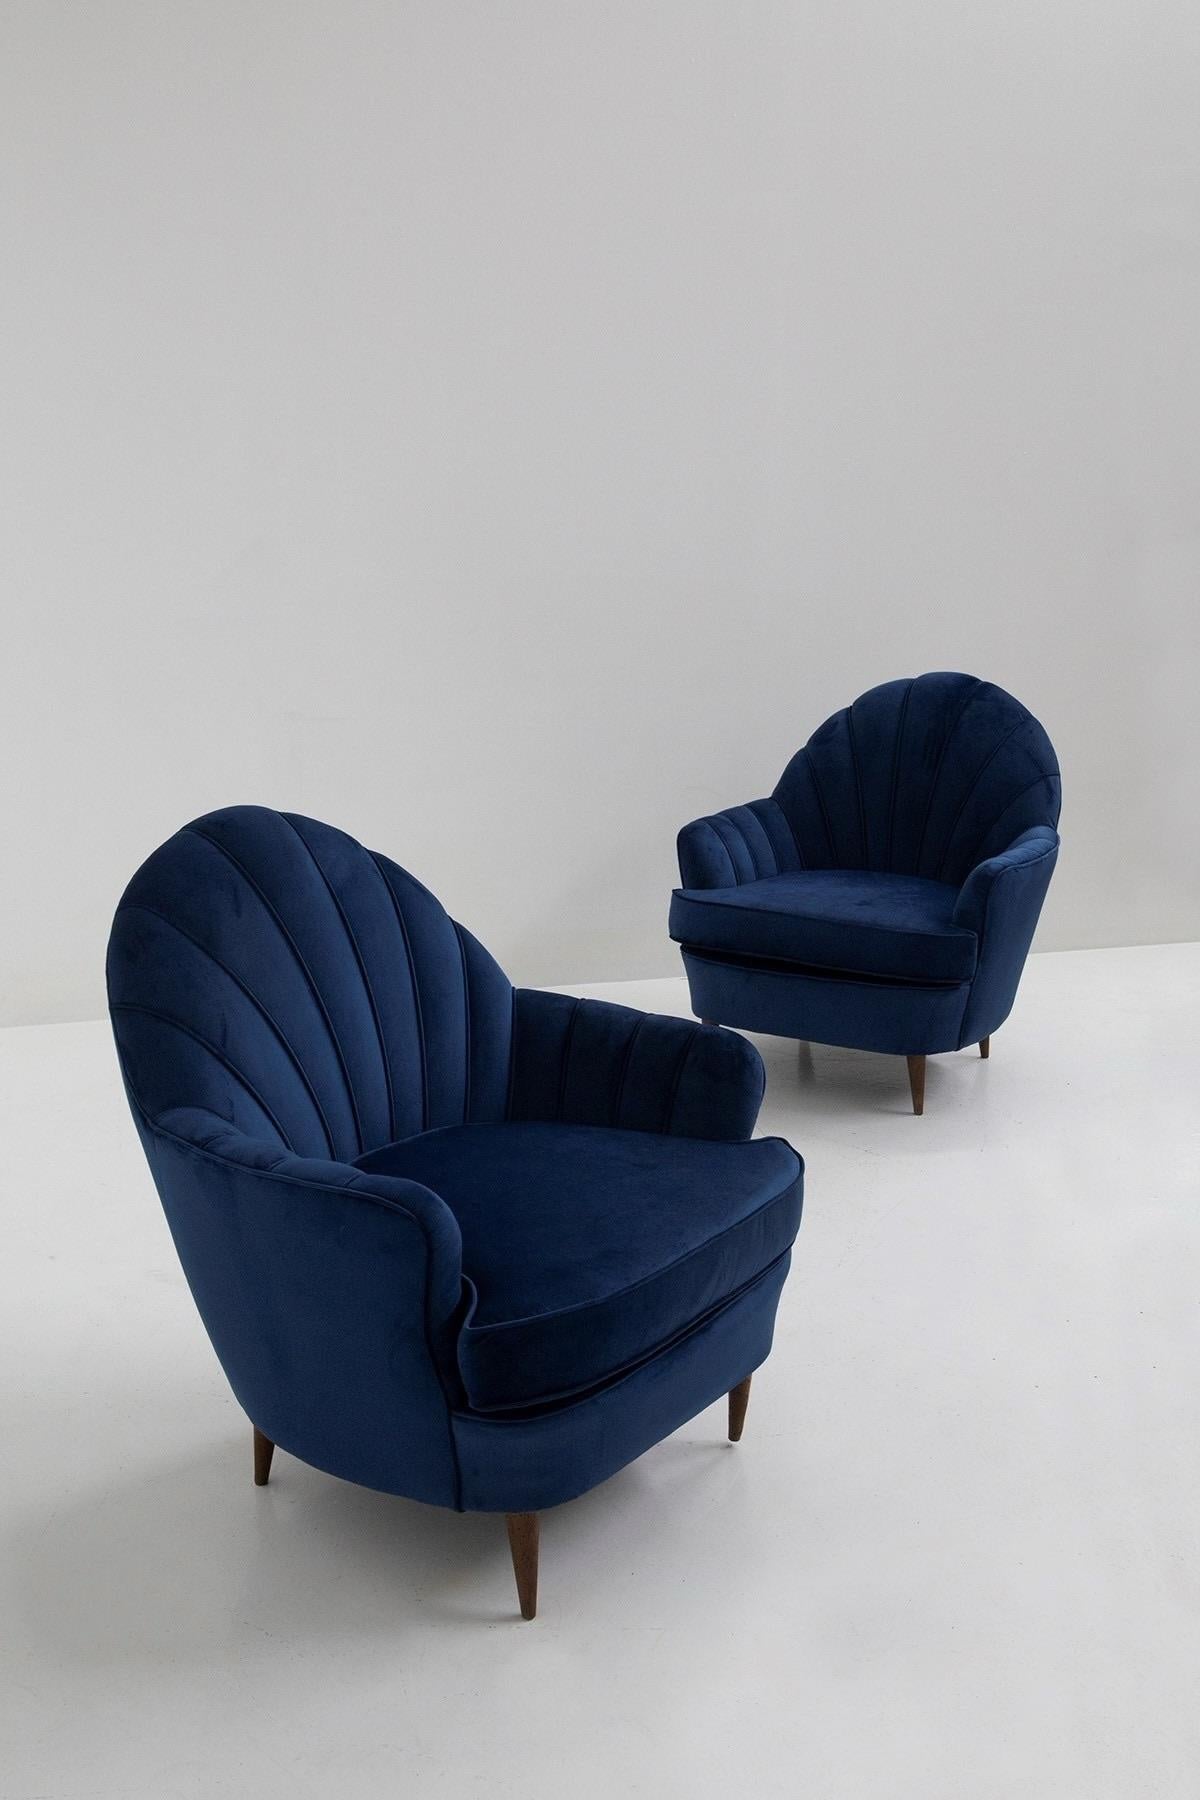 Mid-Century Modern 1950s Italian set of 2 Blue Shell Armchairs attributed to Guglielmo Ulrich. 
Shell-shaped in Blue velvet. with wooden feet.
These Armchairs showcase elegant form and rich details with the beautiful deep blue velvet. Although these